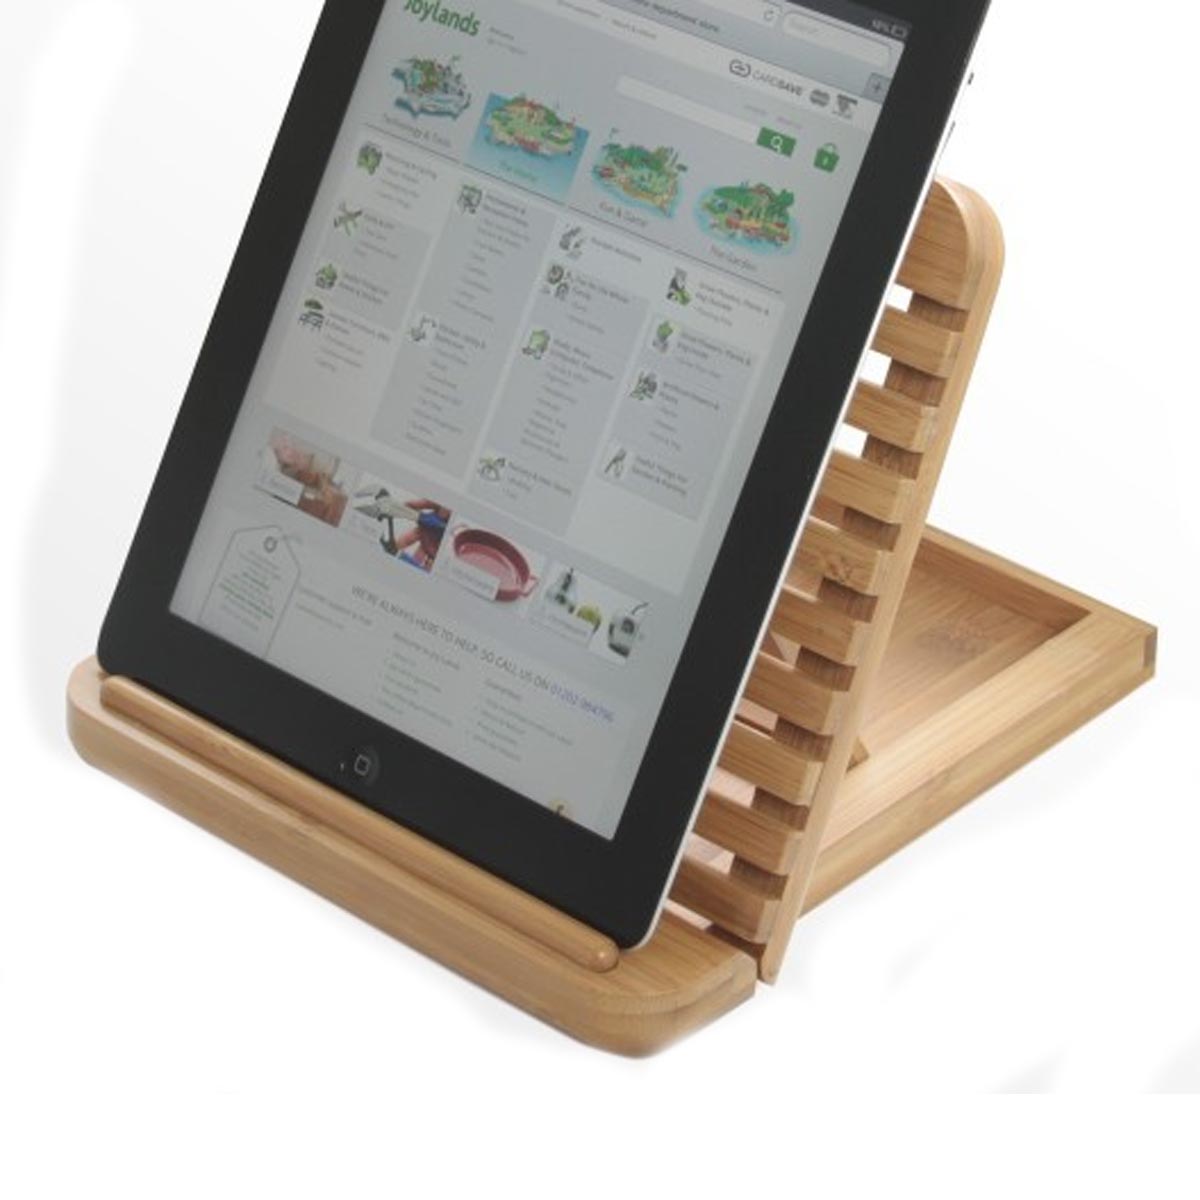 https://www.protecttheplanet.co.uk/user/products/large/1050%20iPad%20Stand%20Woodquail.jpg